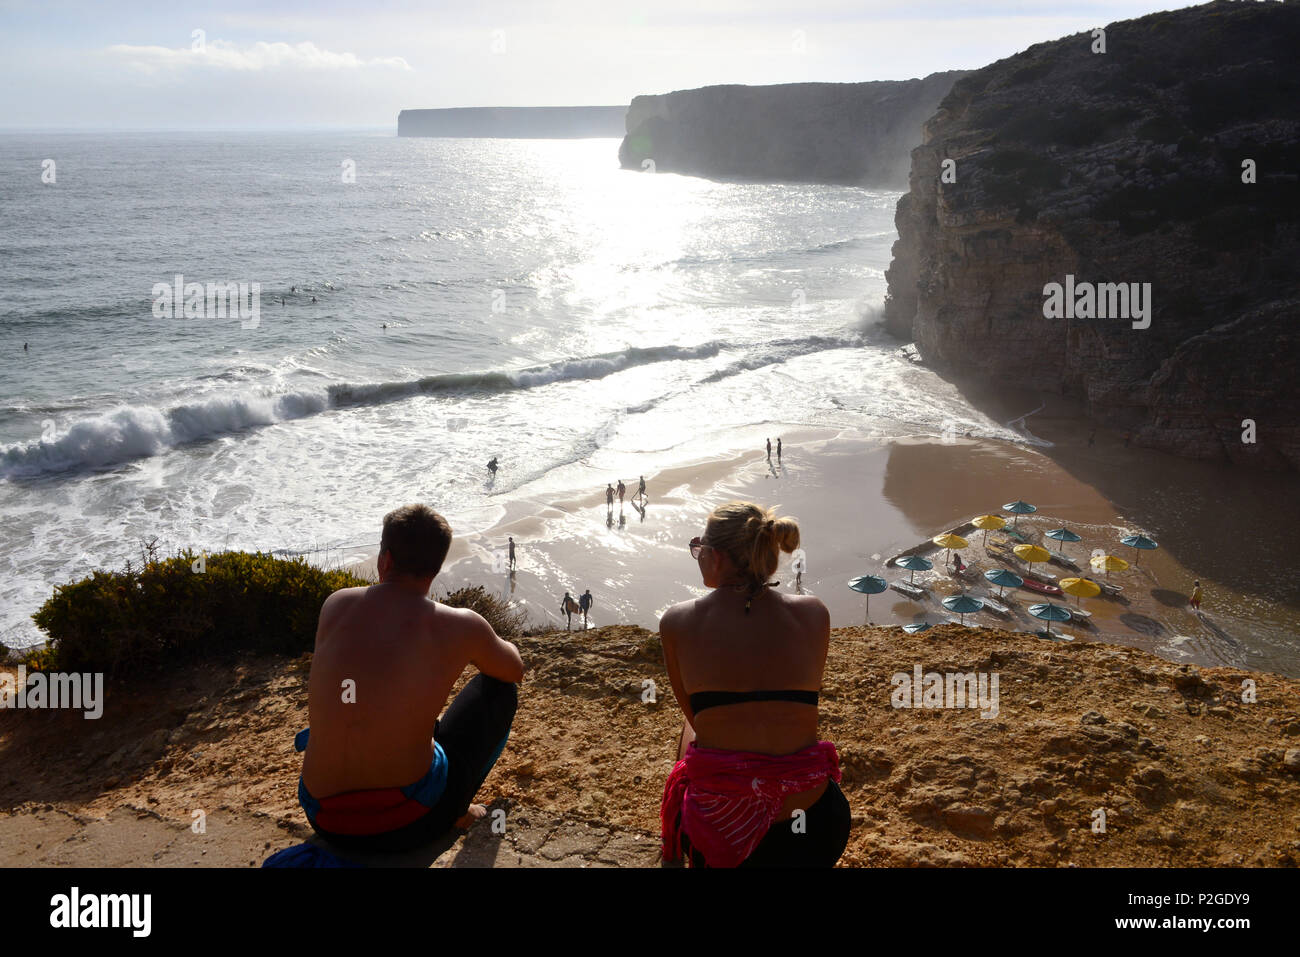 Young couple admiring the view, Surfer beach near Sagres, Algarve, Portugal Stock Photo